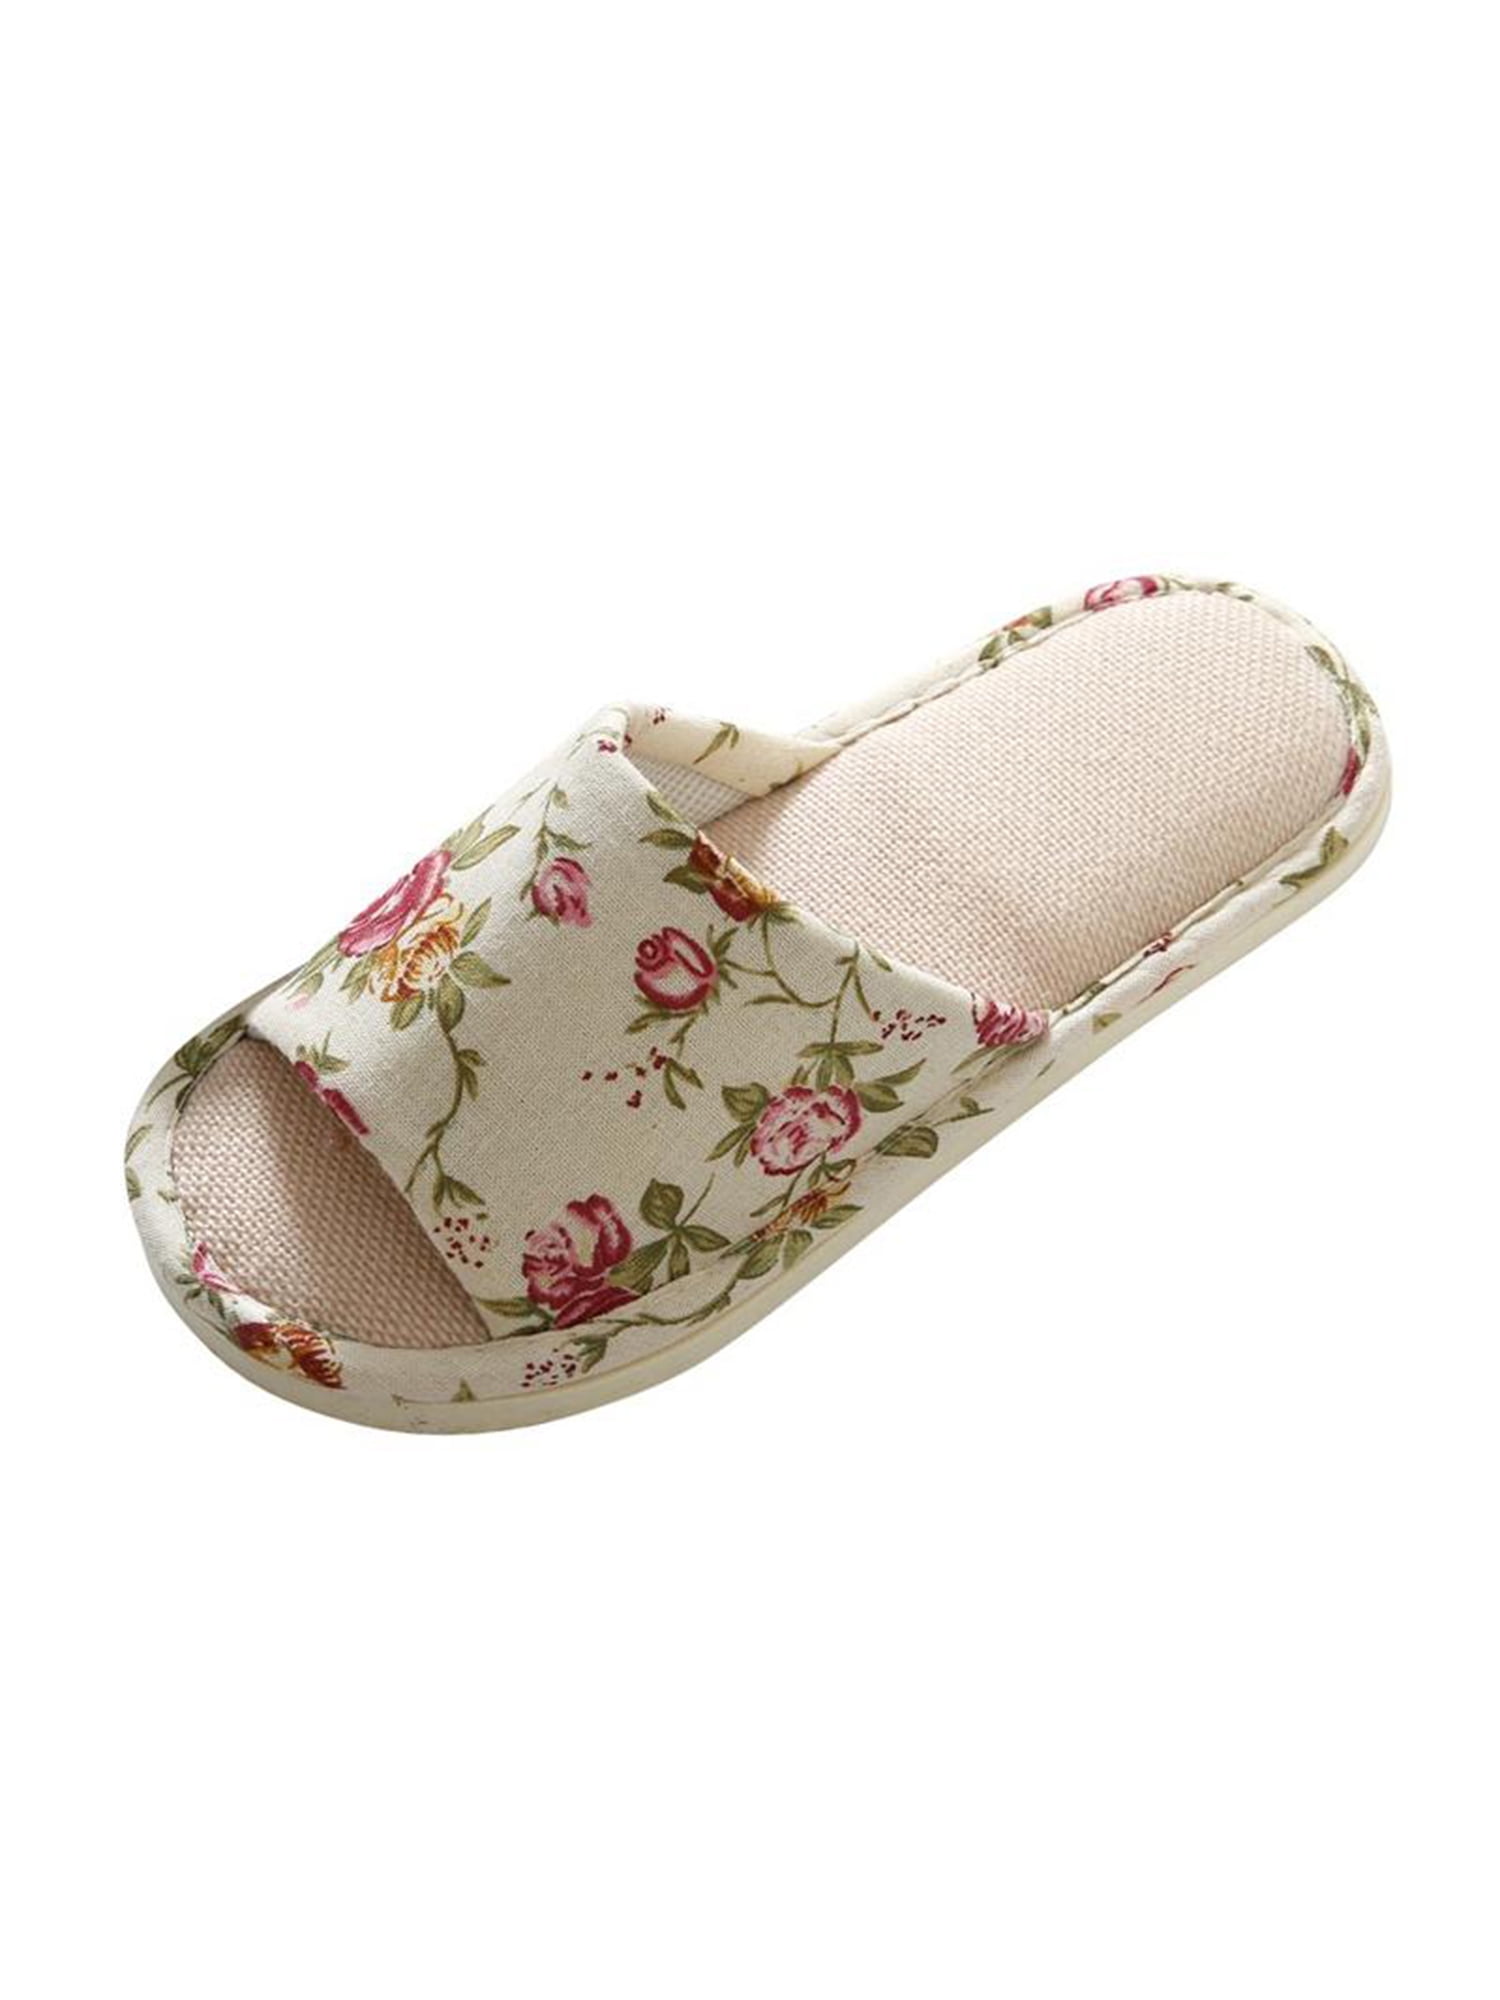 Buy > washable house slippers > in stock